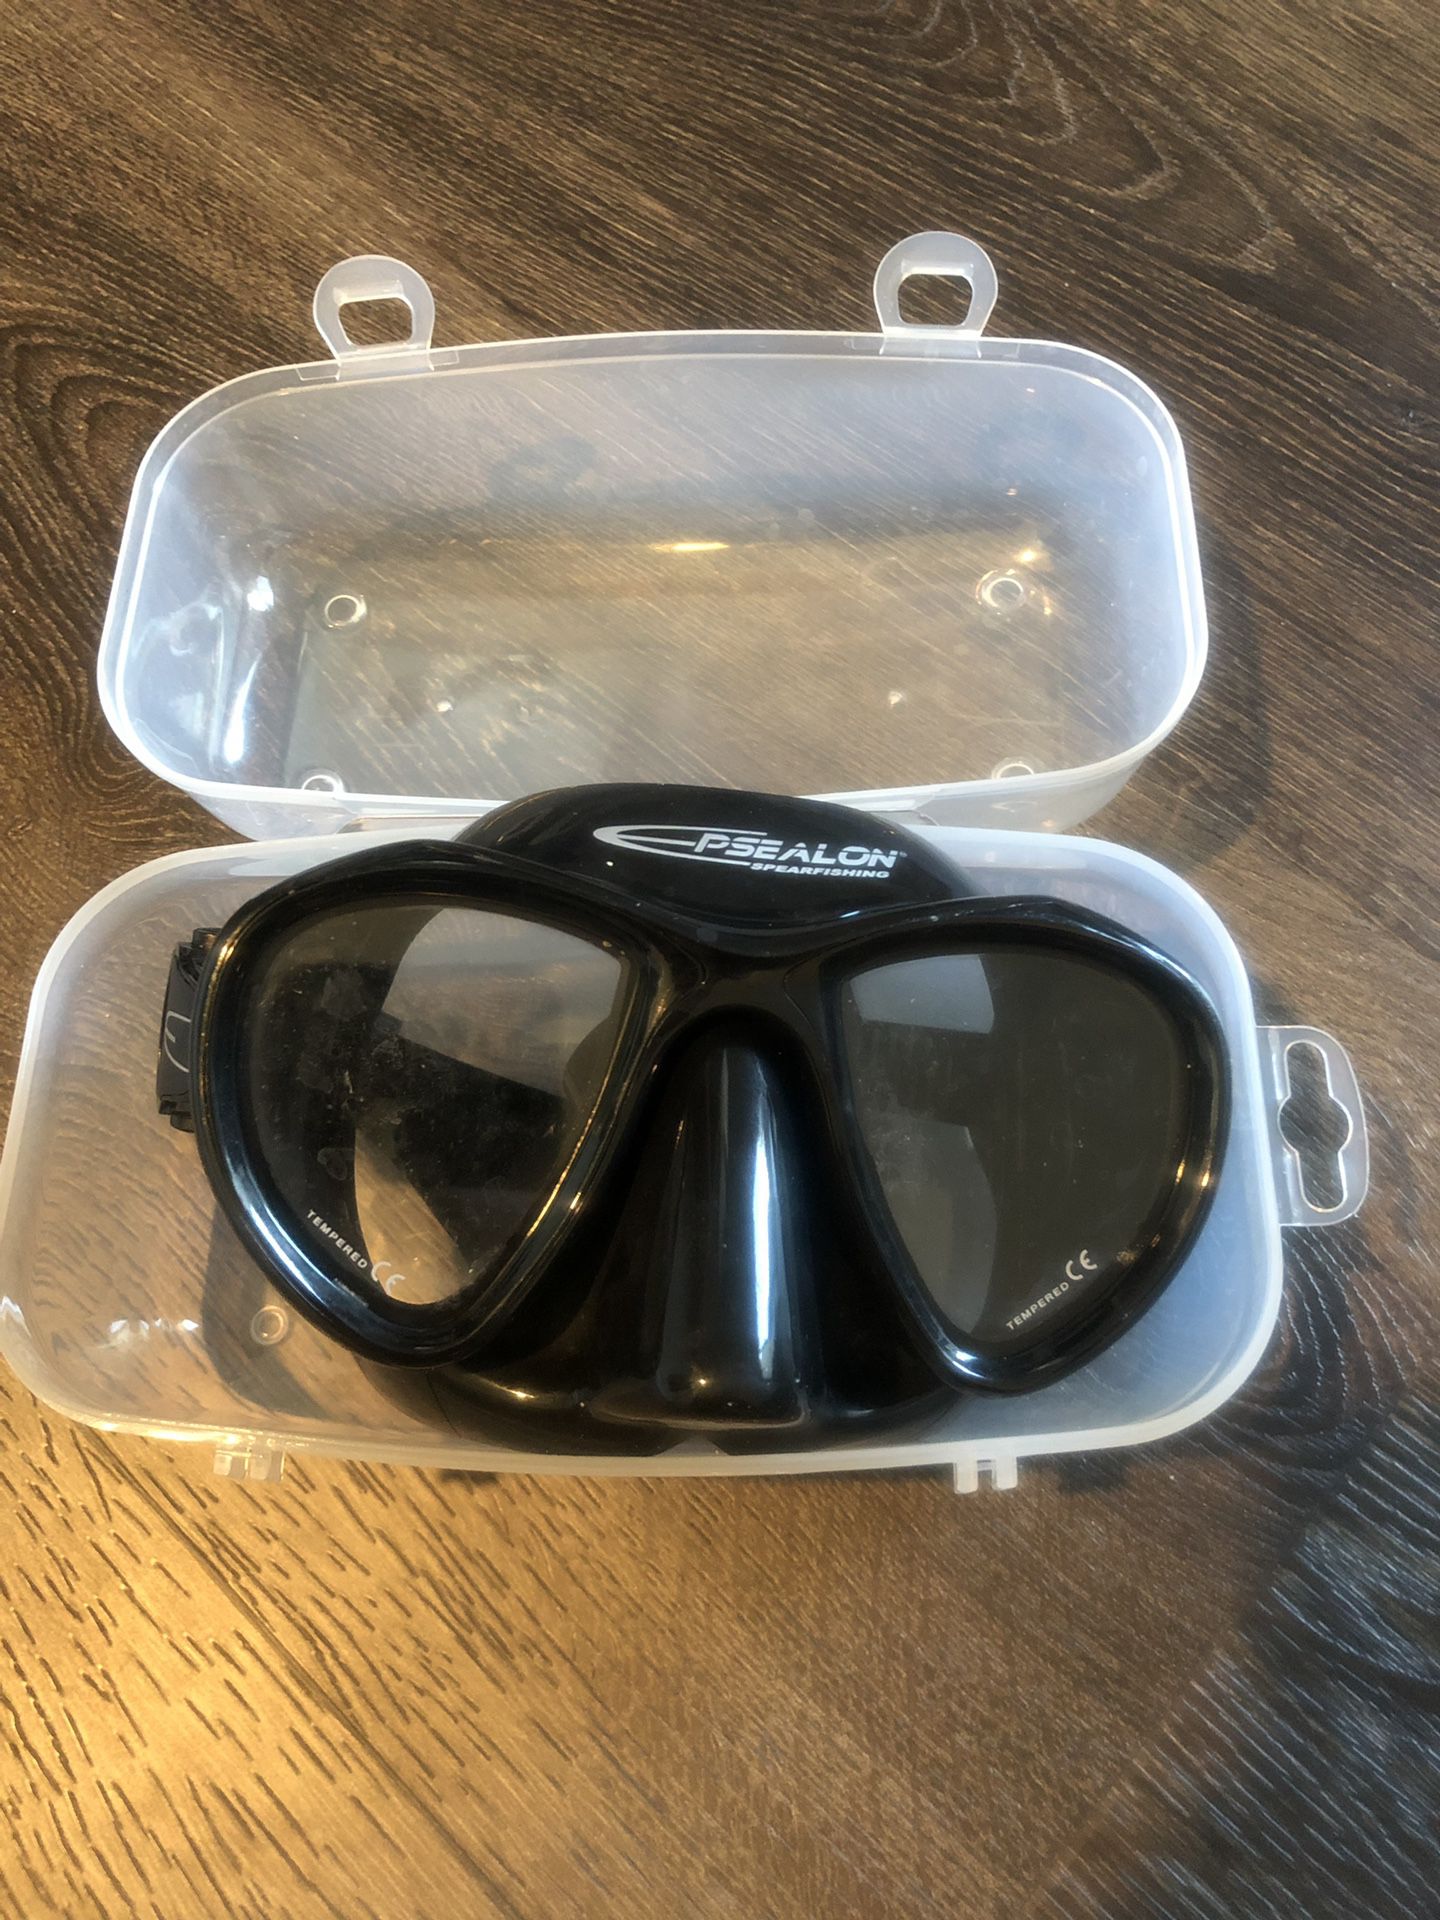 PSEALON Spearfishing/Dive Mask for Sale in Anaheim, CA - OfferUp